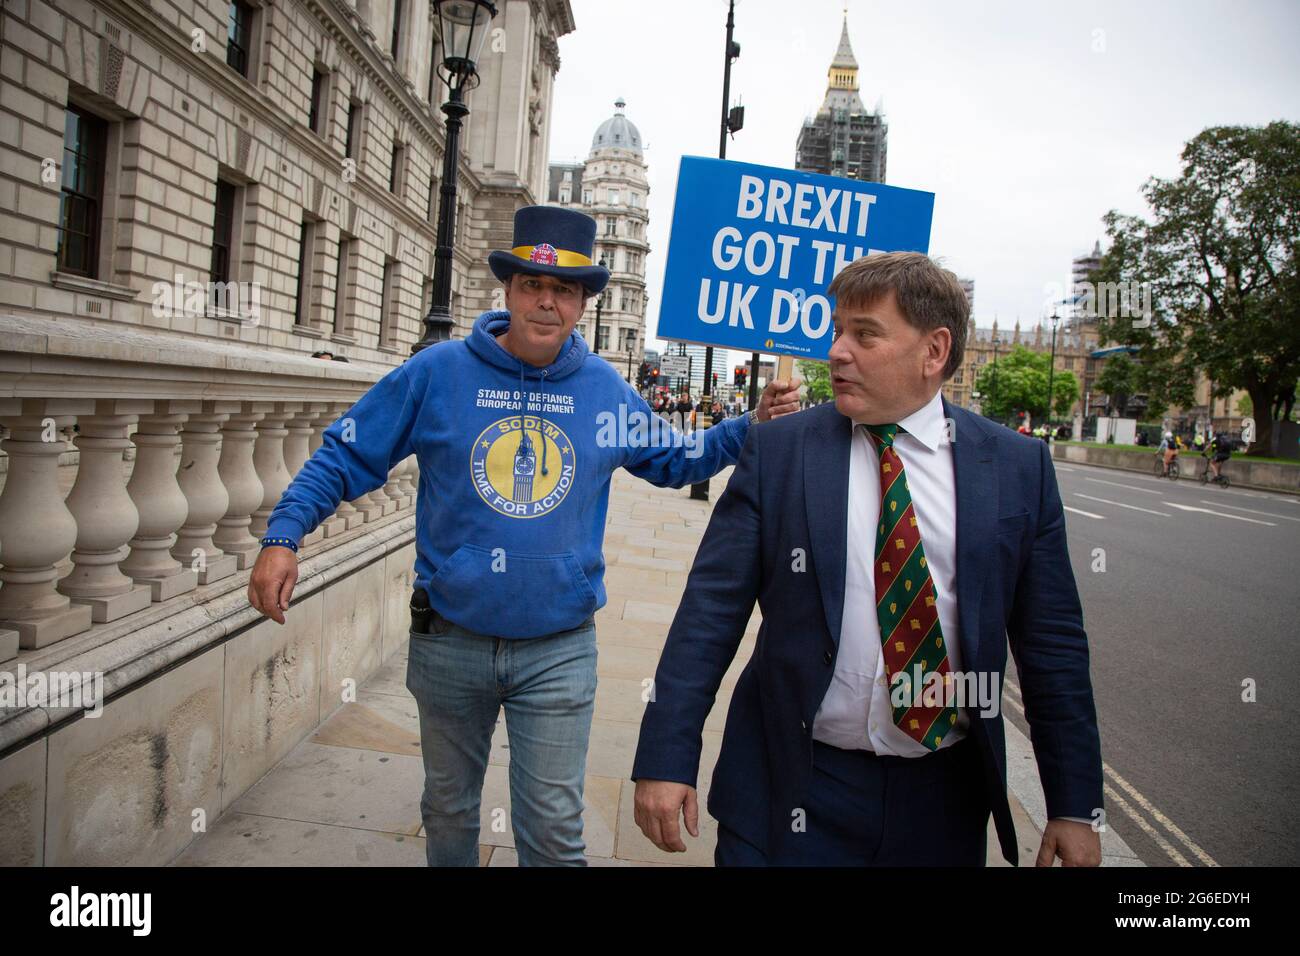 Steve Bray, Anti Brexit Protester following Andrew Bridgen, MP for North West Leicester in Whitehall, London, UK, 5,7,2021 Stock Photo